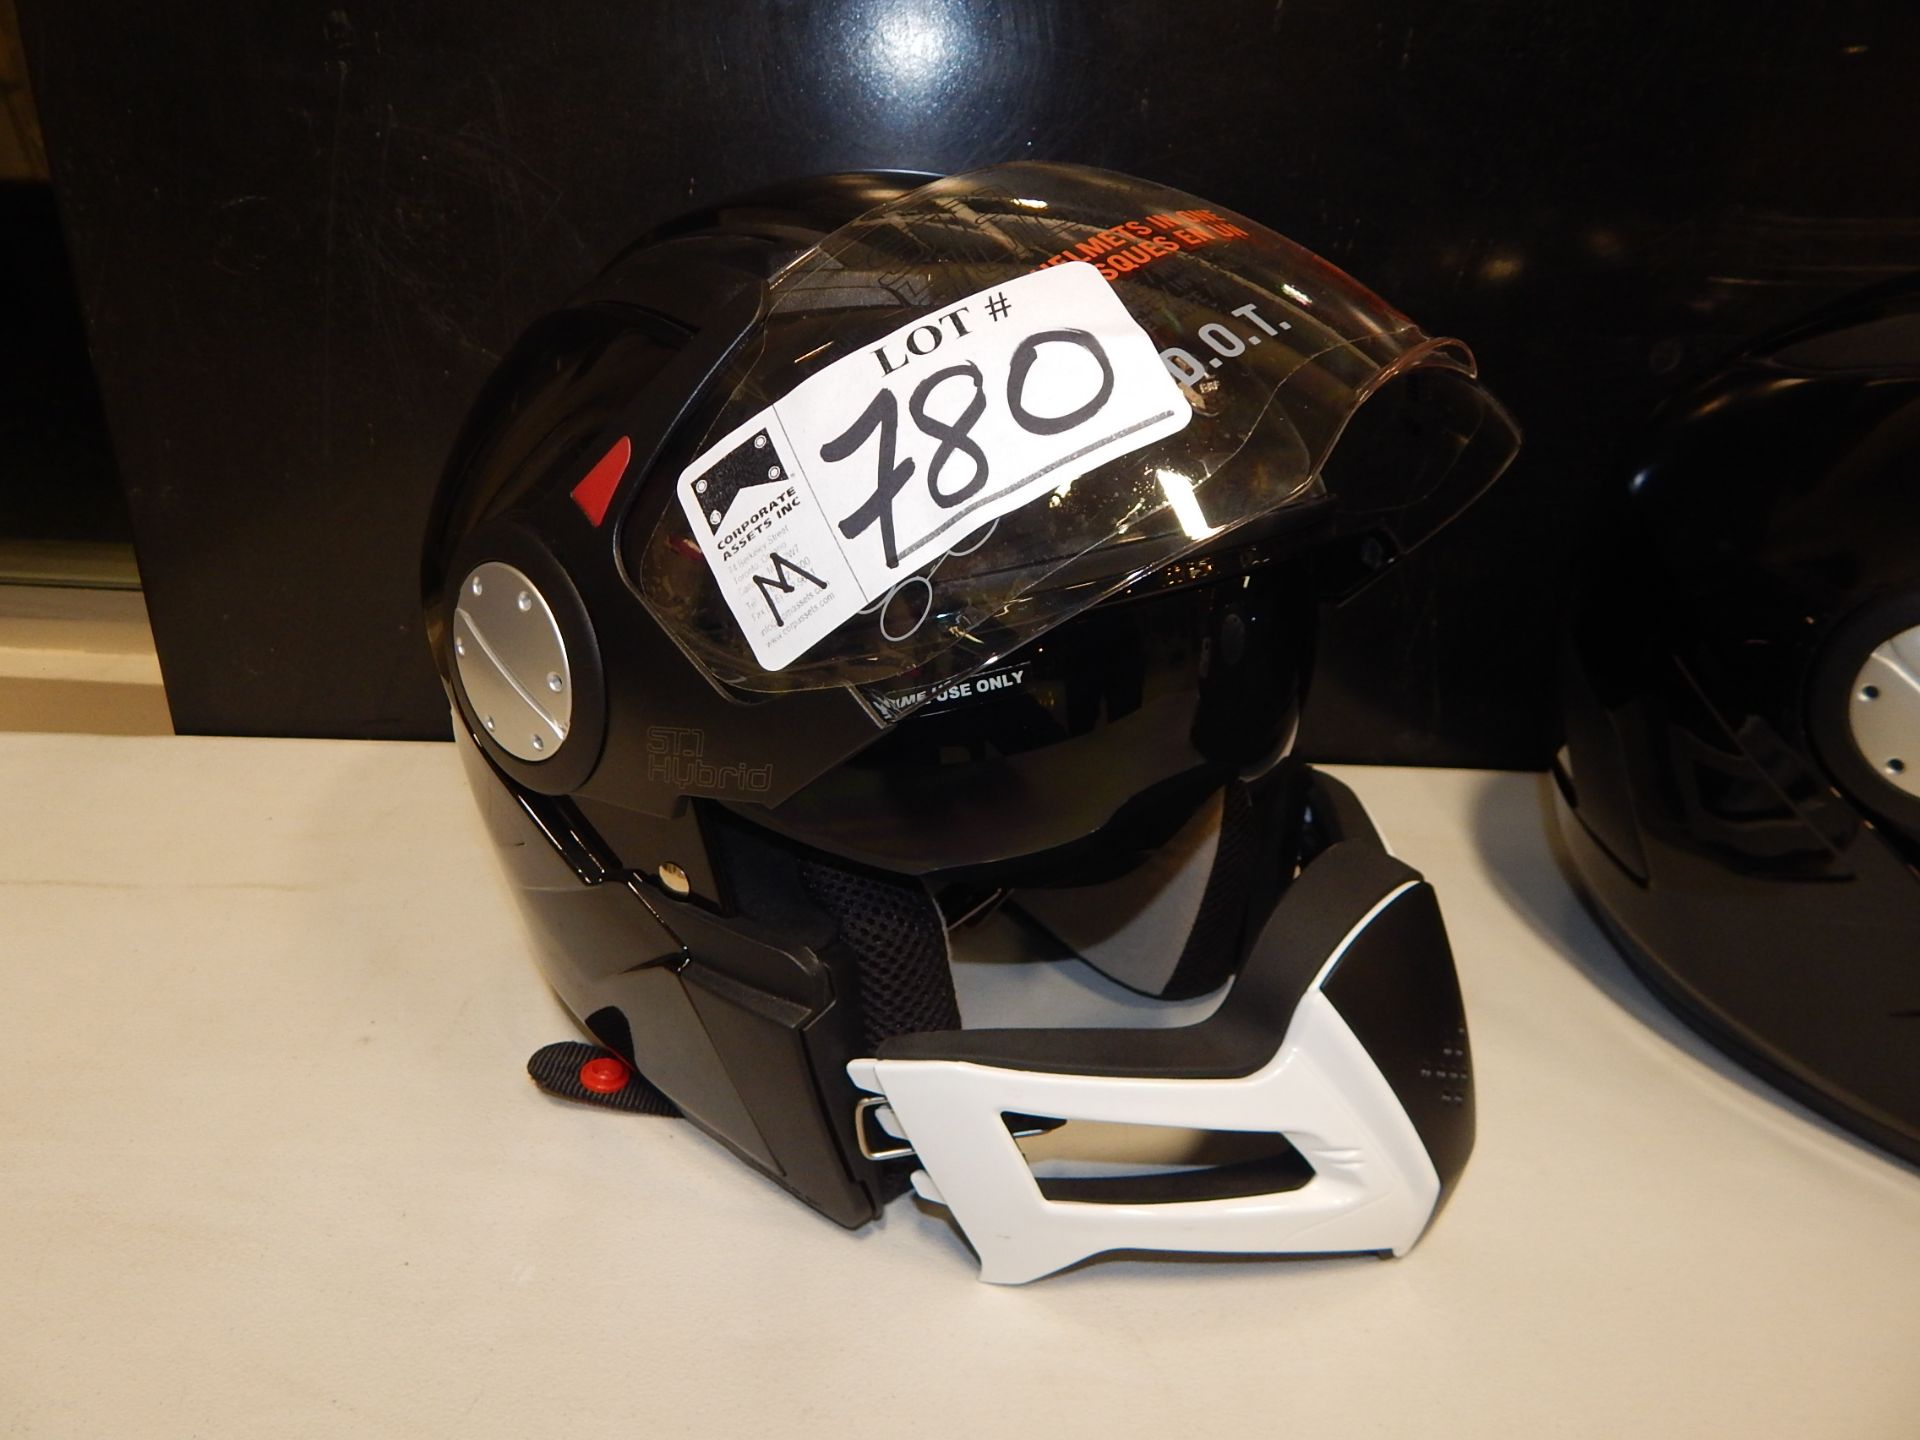 CASQUE CAN AM TAILLE M / CAN AM HELMET SIZE M